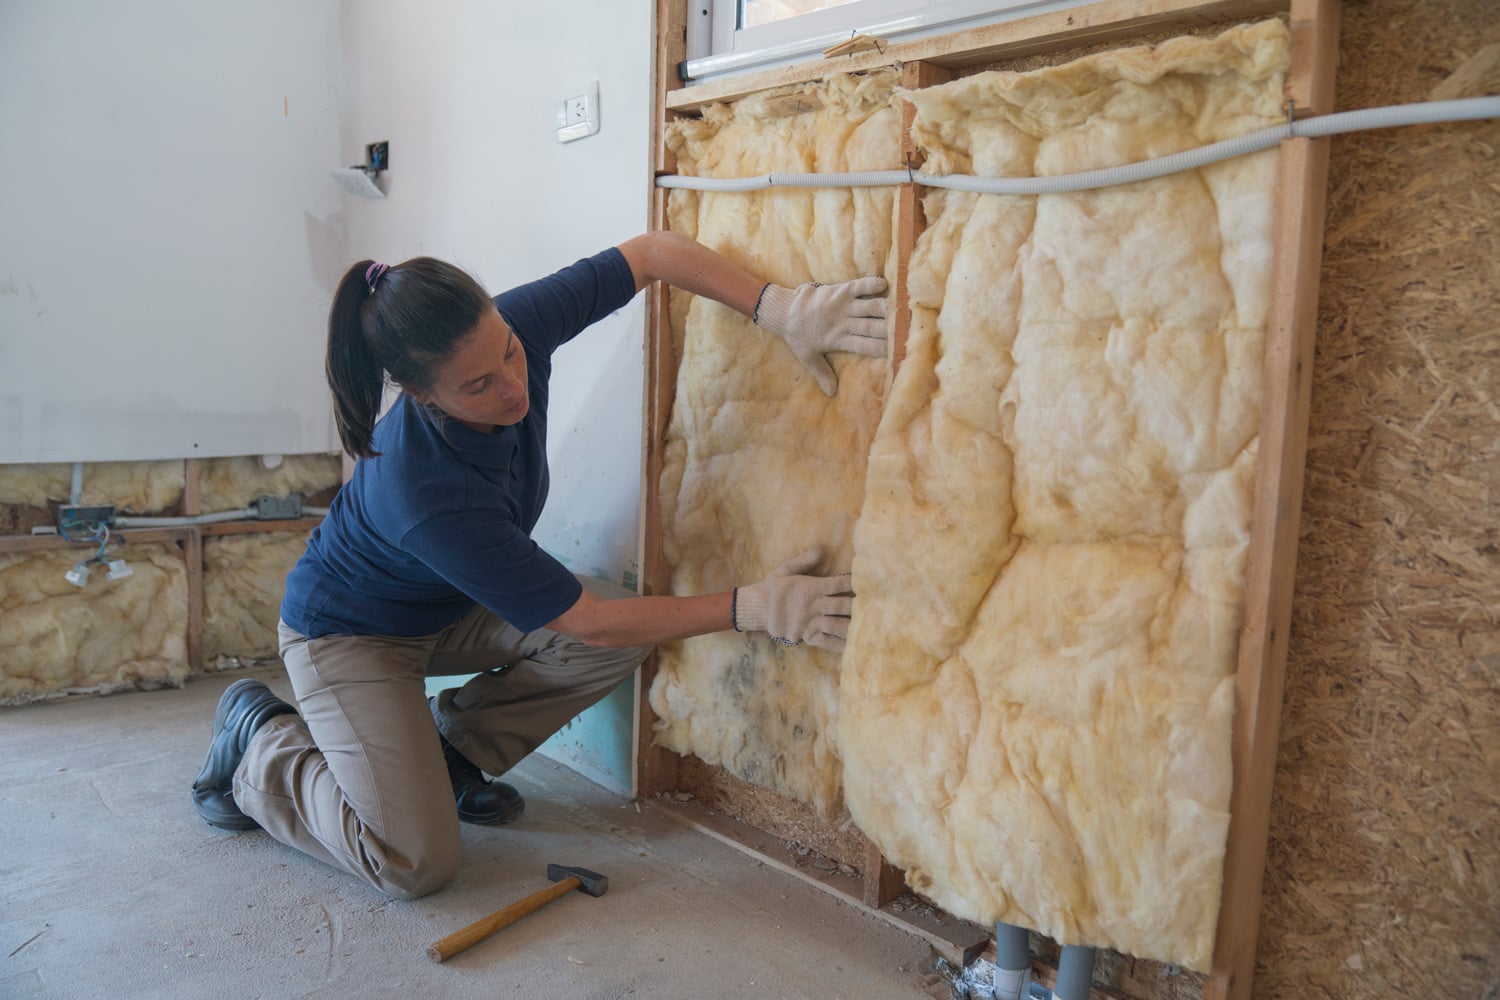 A female worker is installing a fiberglass insulation on a wall during wood frame house construction